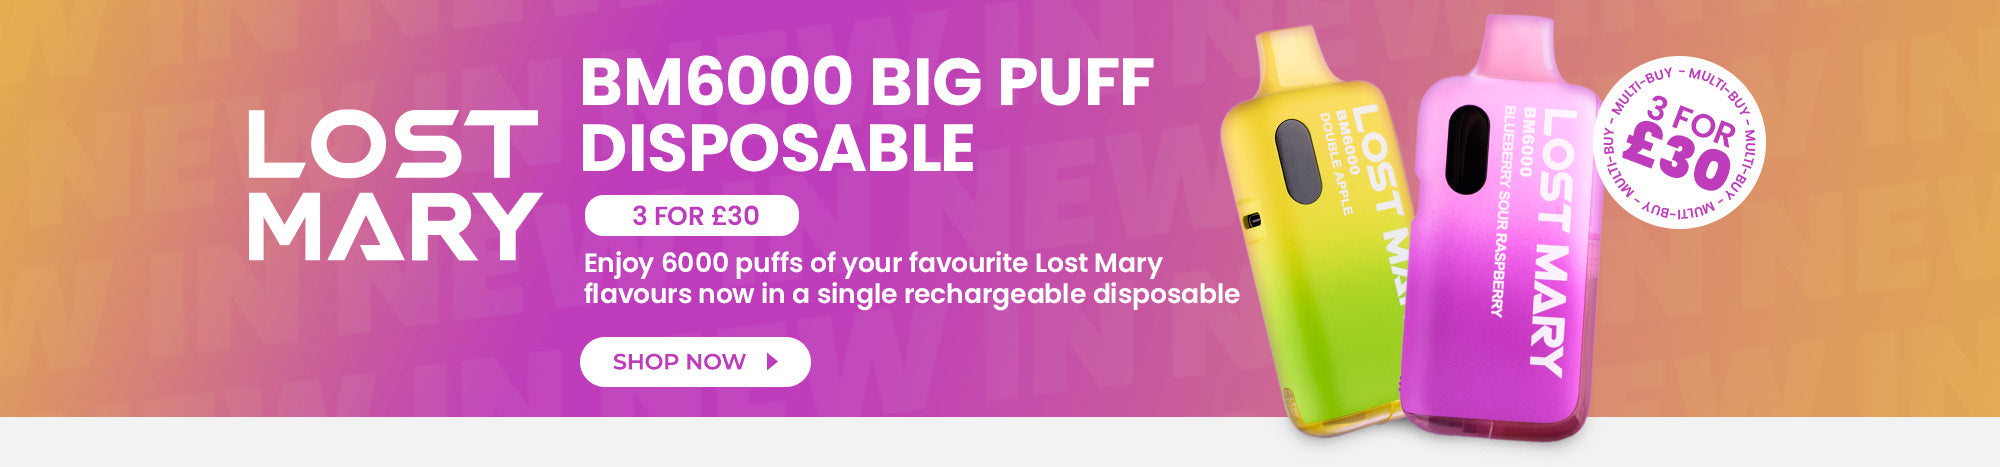 Lost Mary BM6000 - Discover the 1st Big Puff Disposable from Lost Mary. Now In Stock